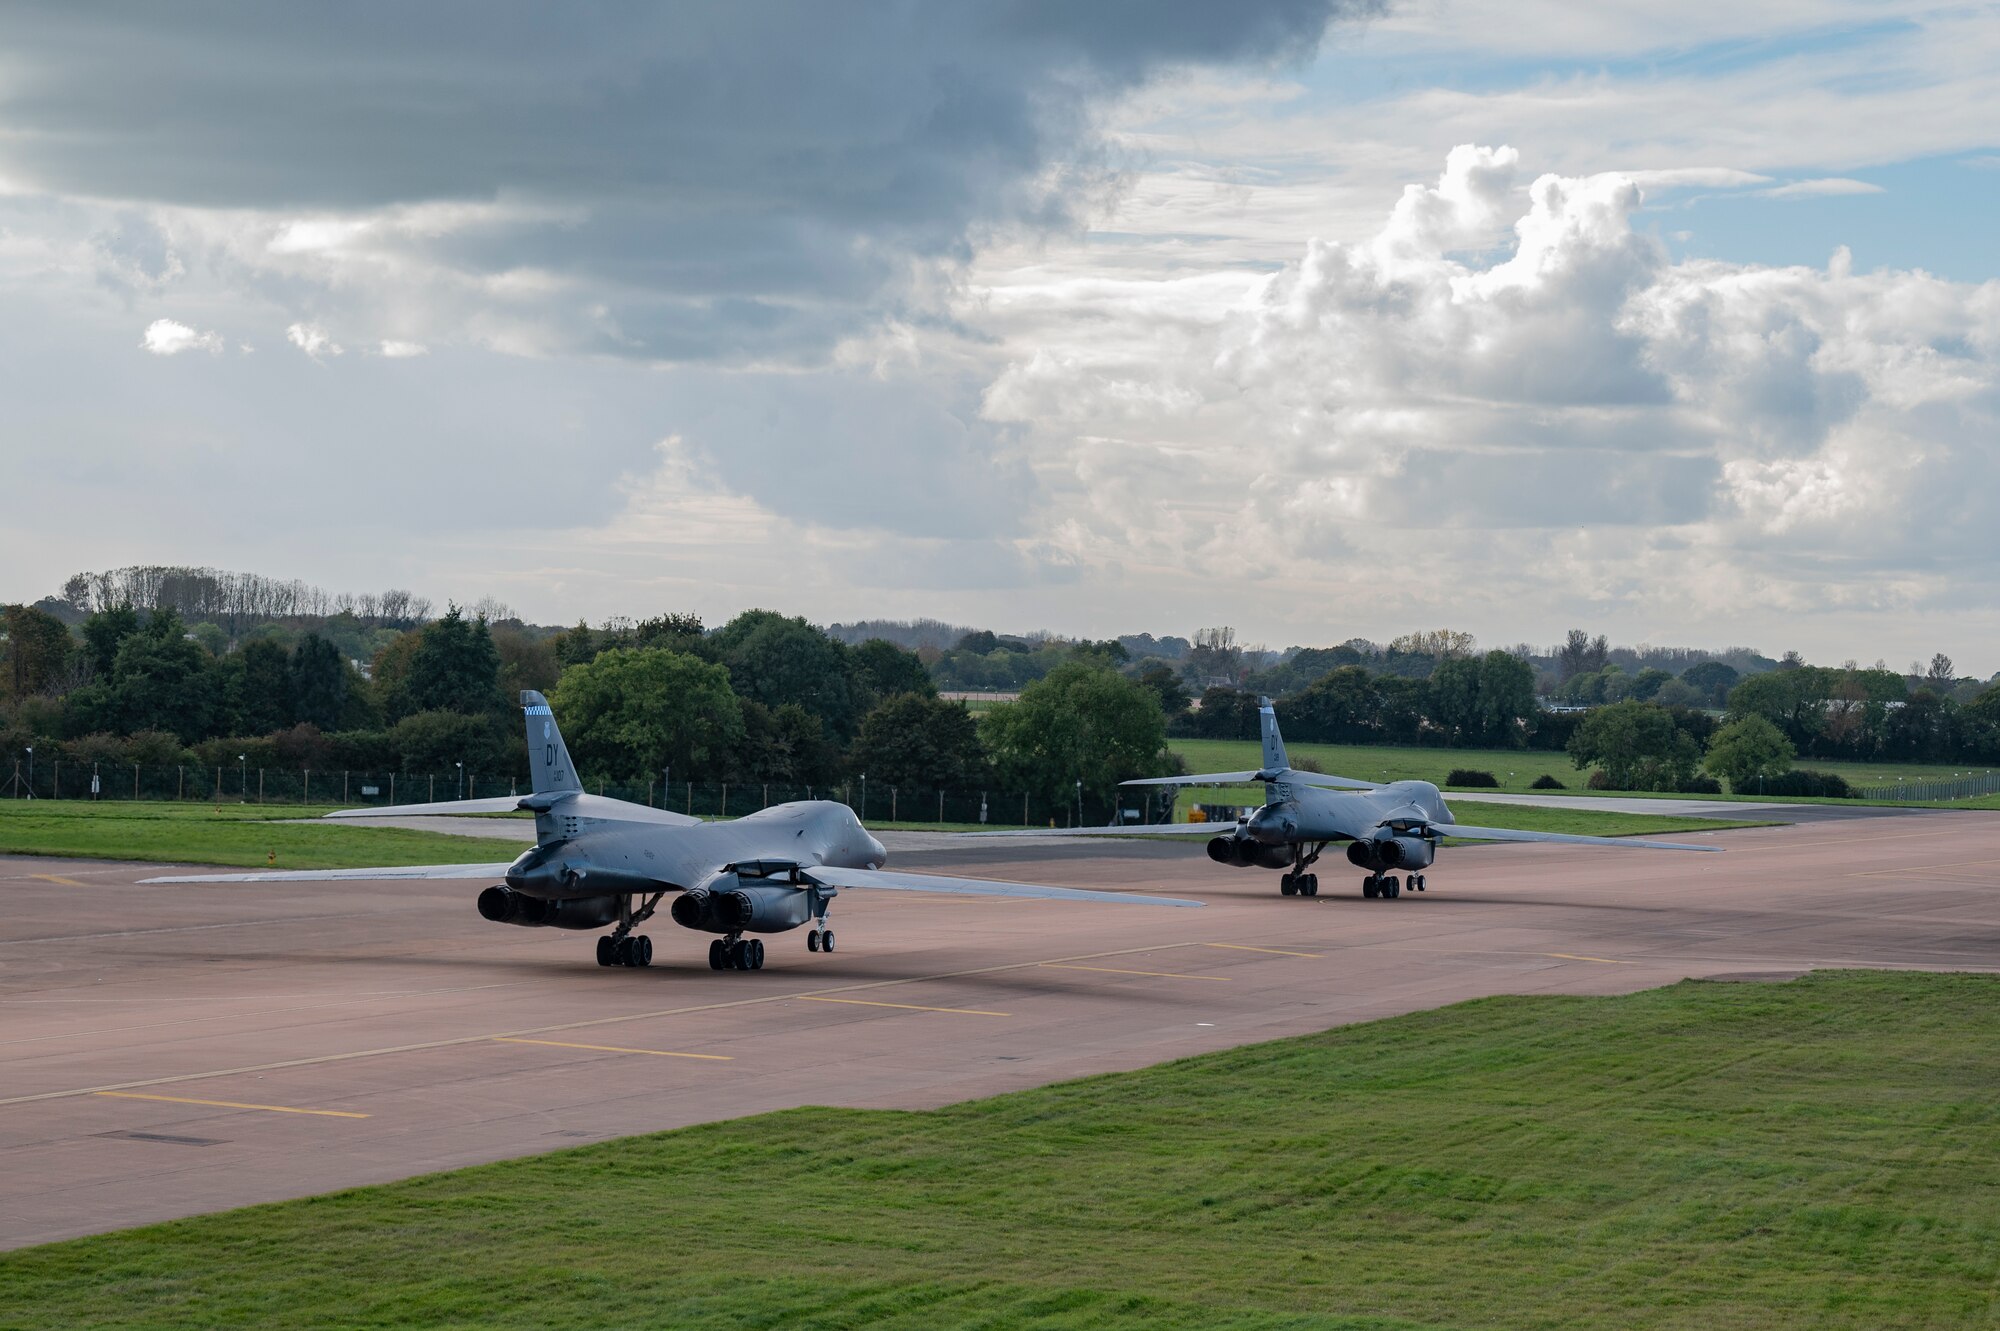 Two B-1B Lancers assigned to the 9th Expeditionary Bomb Squadron taxi on the flightline at RAF Fairford, United Kingdom, Oct. 12, 2023. The U.S. Air Force routinely deploys a variety of aircraft and units throughout Europe for training and to support geographic combatant command objectives. (U.S. Air Force Photo by Senior Airman Ryan Hayman)